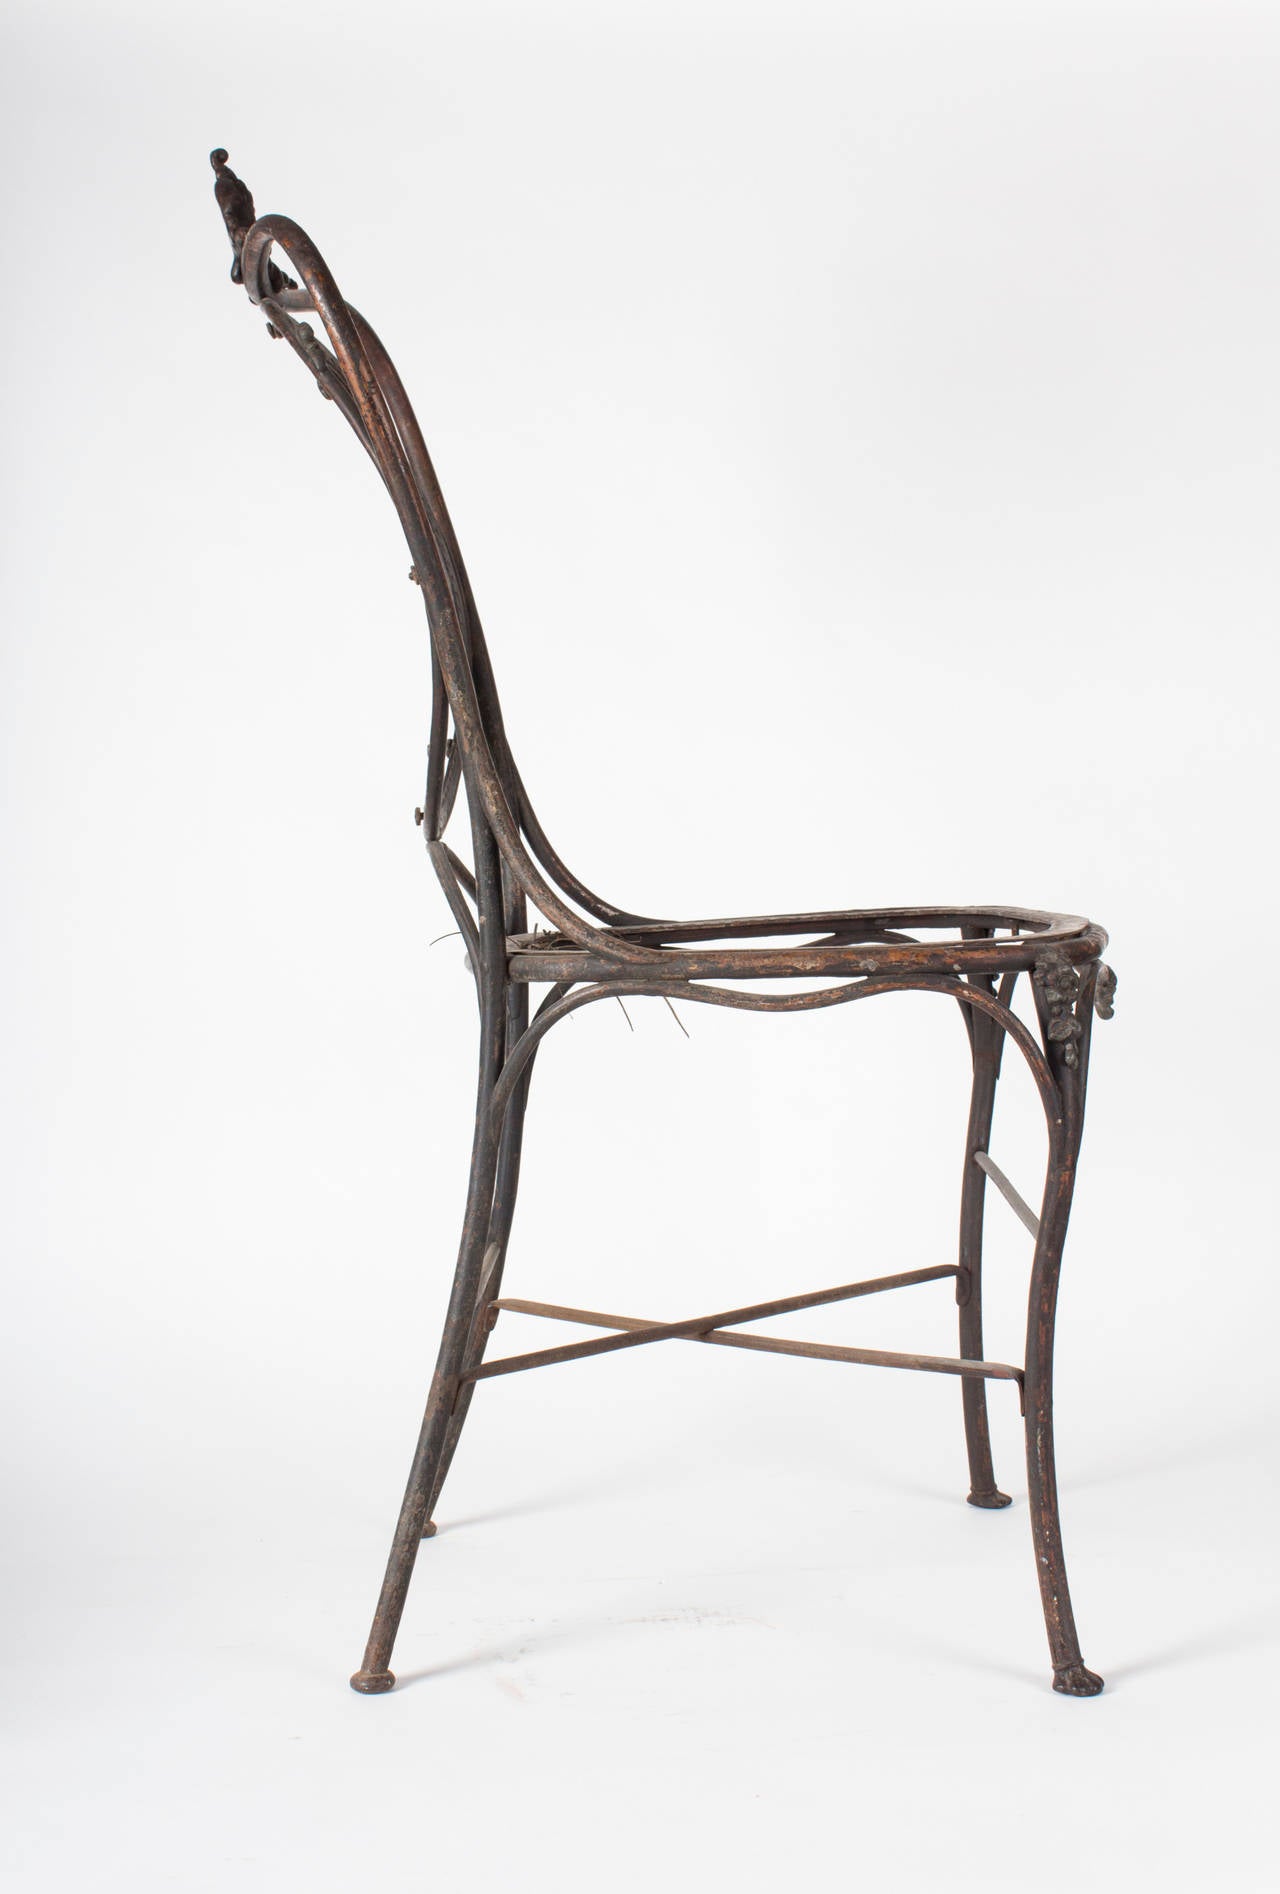 Mid-19th Century Iron Chair attributed to August Kitschelt Vienna ca. 1855 For Sale